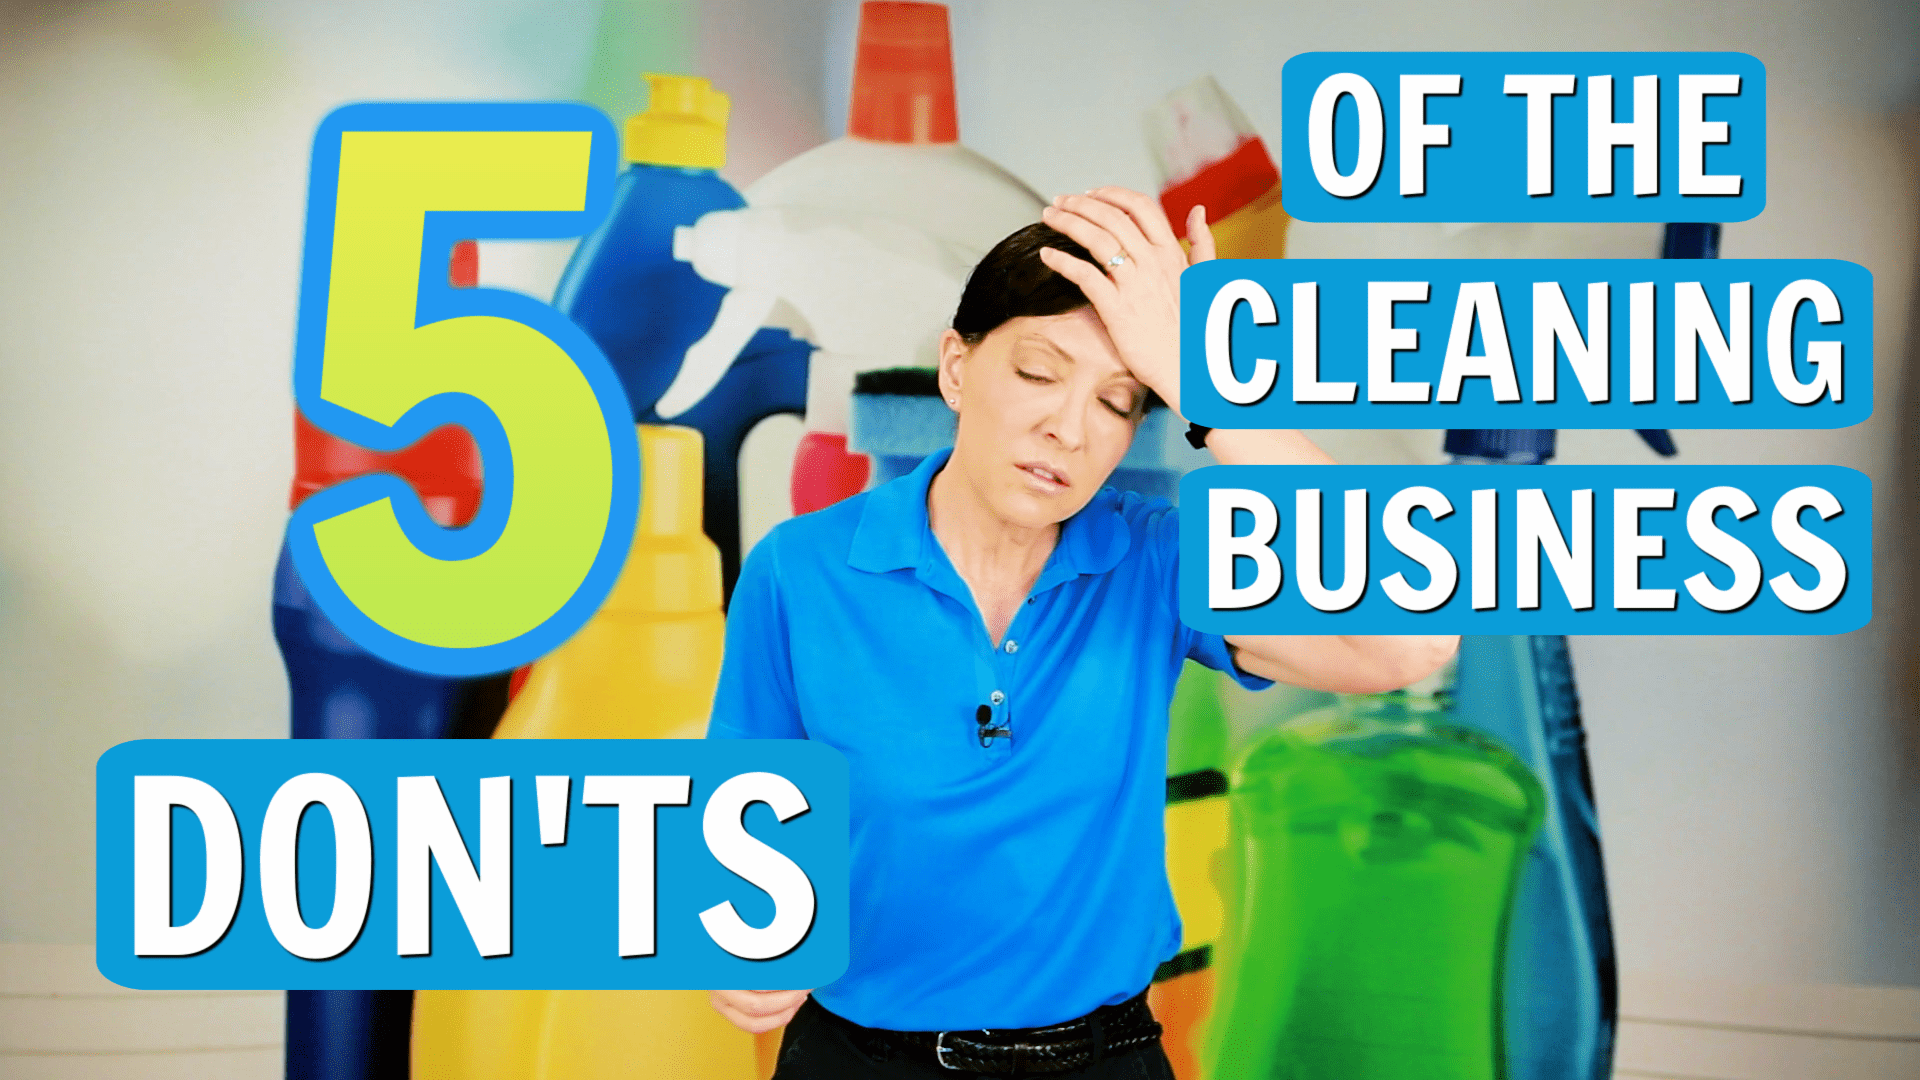 5 Don'ts of the Cleaning Business, Angela Brown, Savvy Cleaner